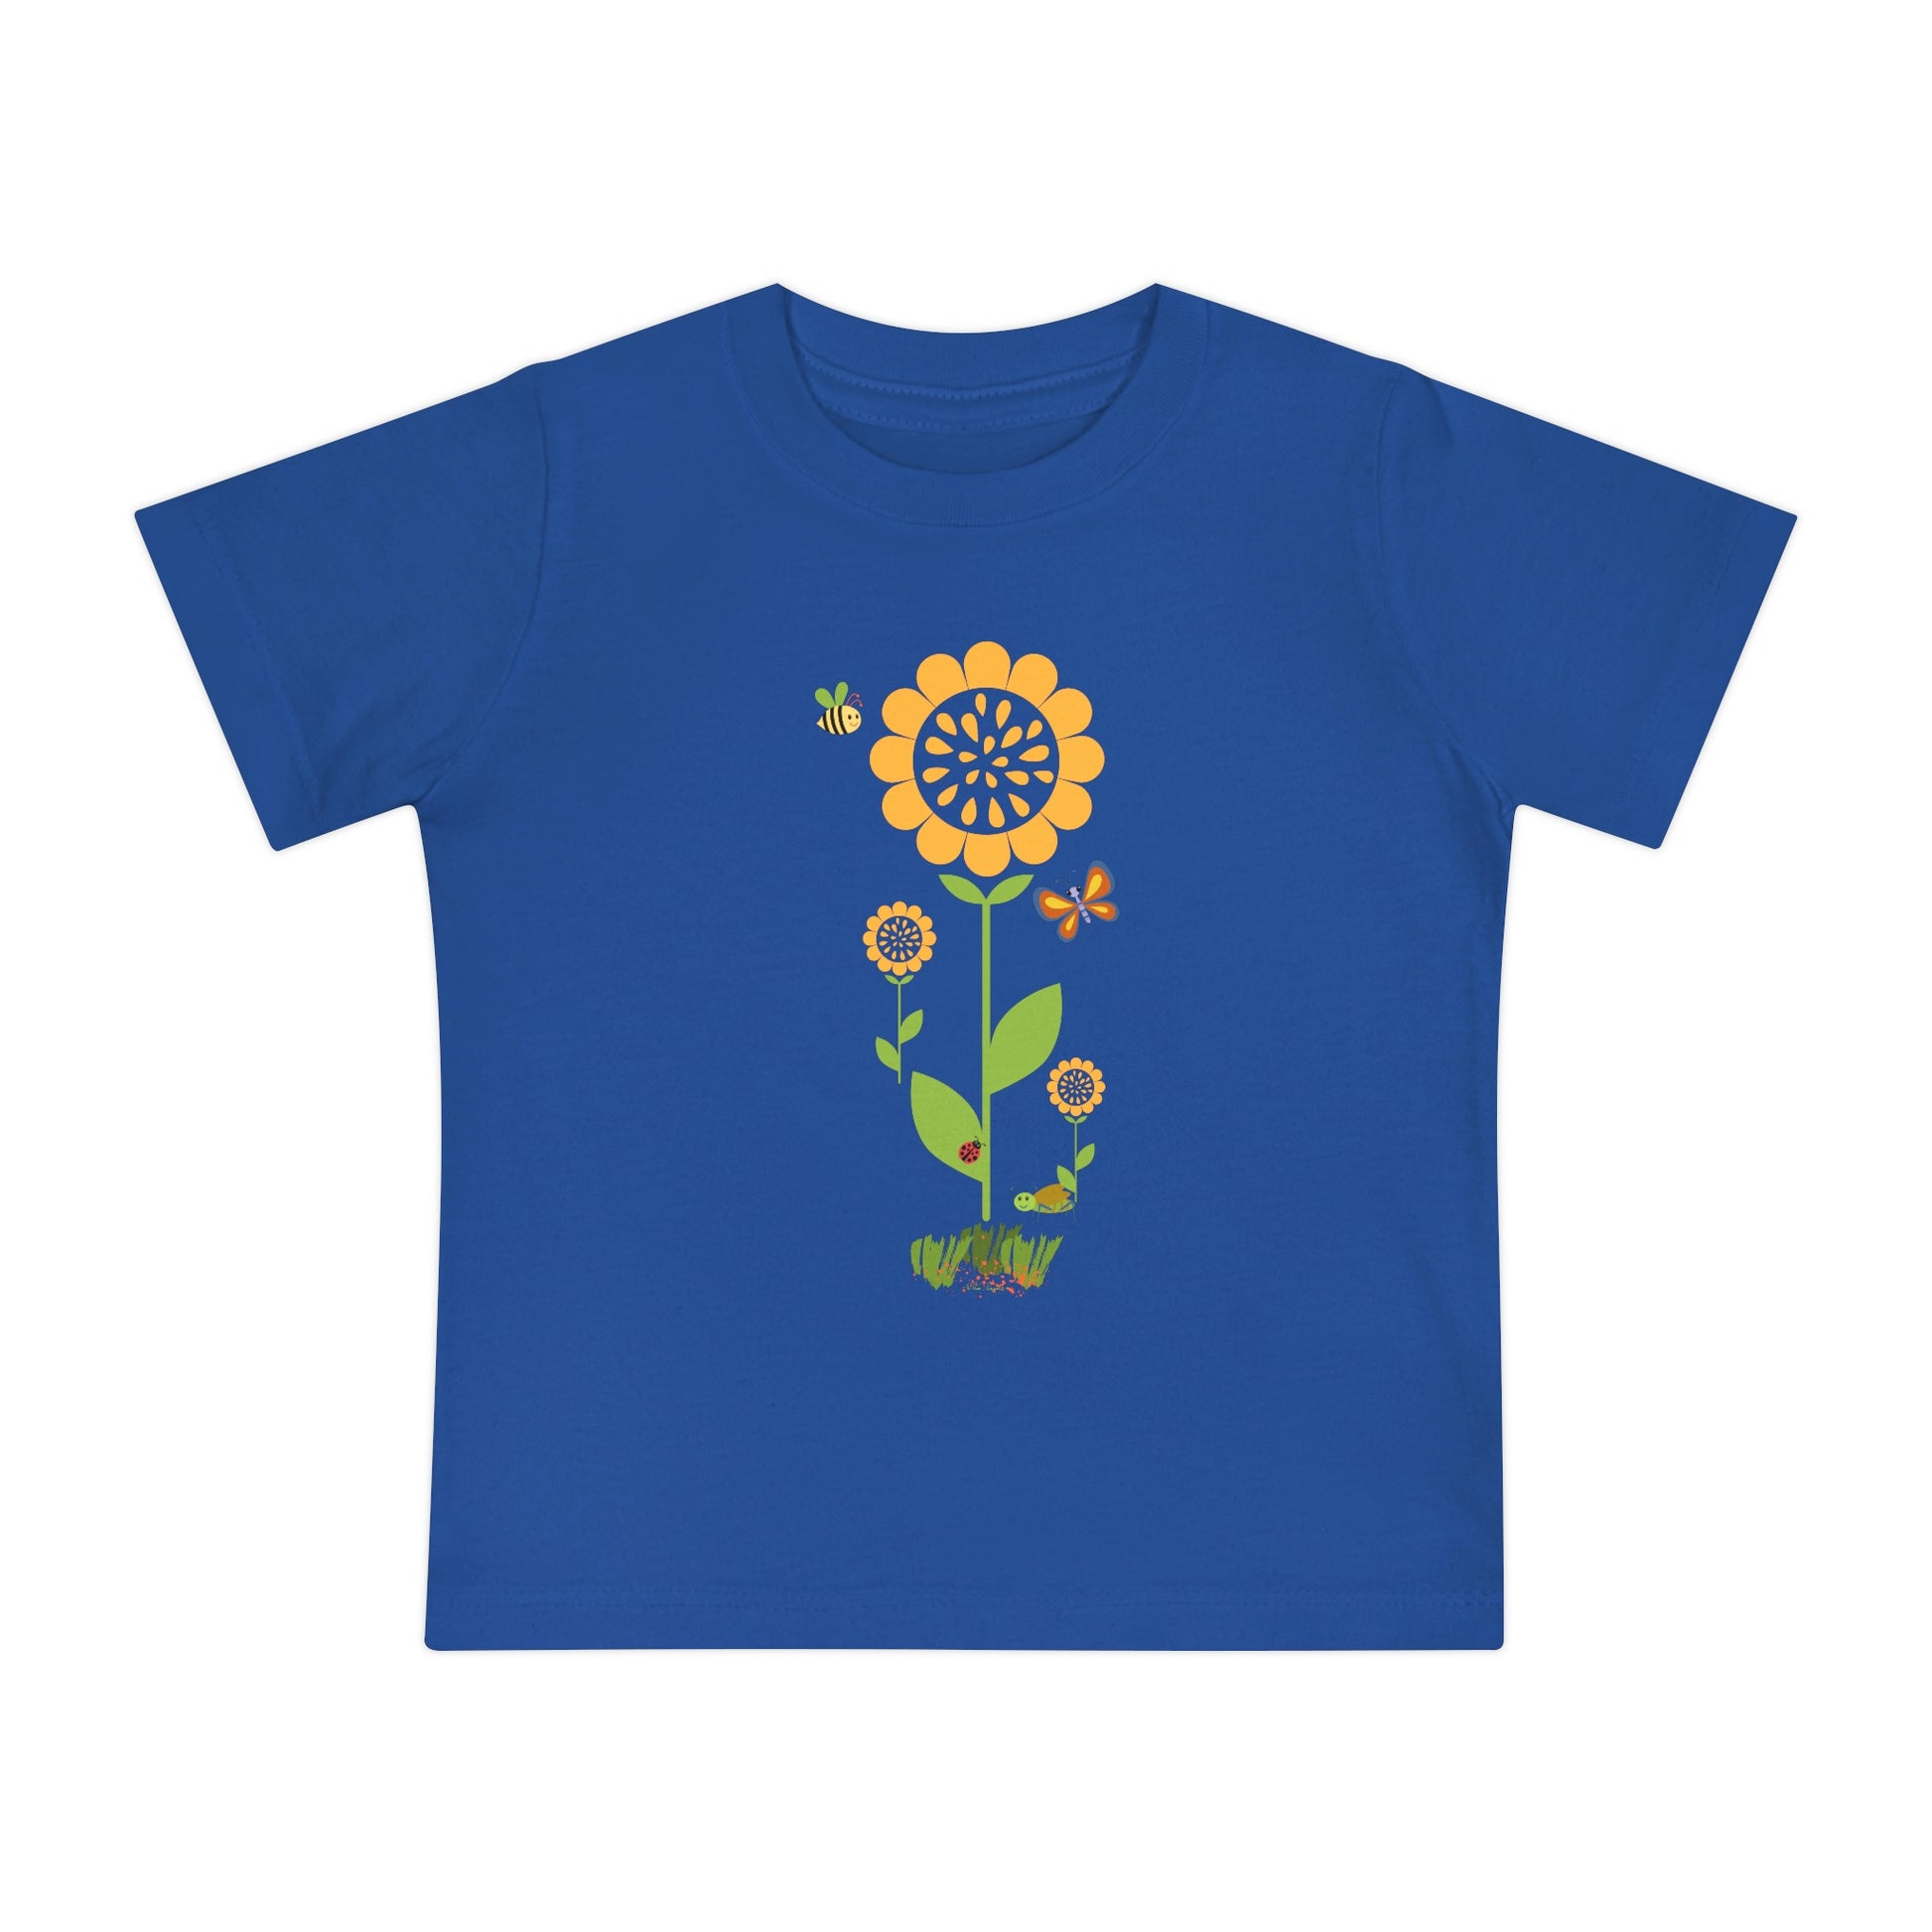 Flat front view of the Royal t-shirt